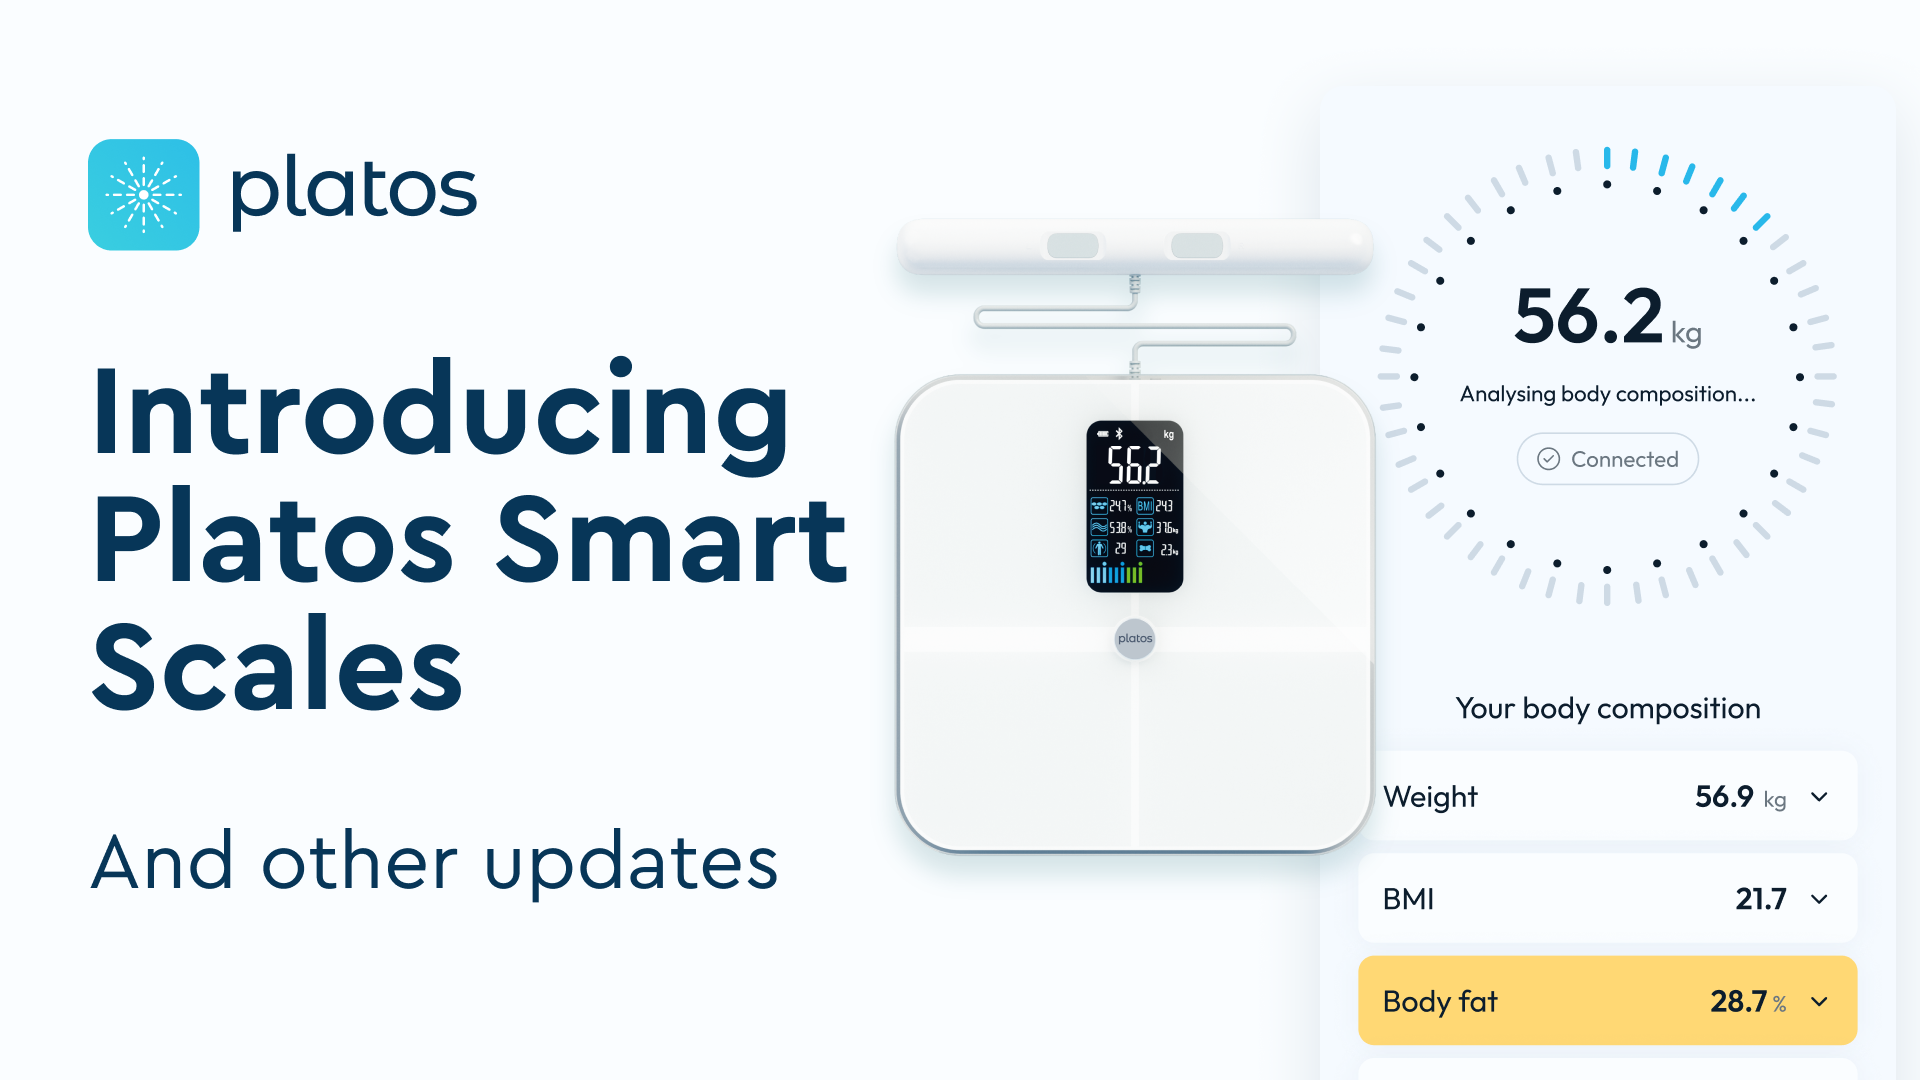 Introducing Platos Smart Scales for advanced health monitoring plus other updates